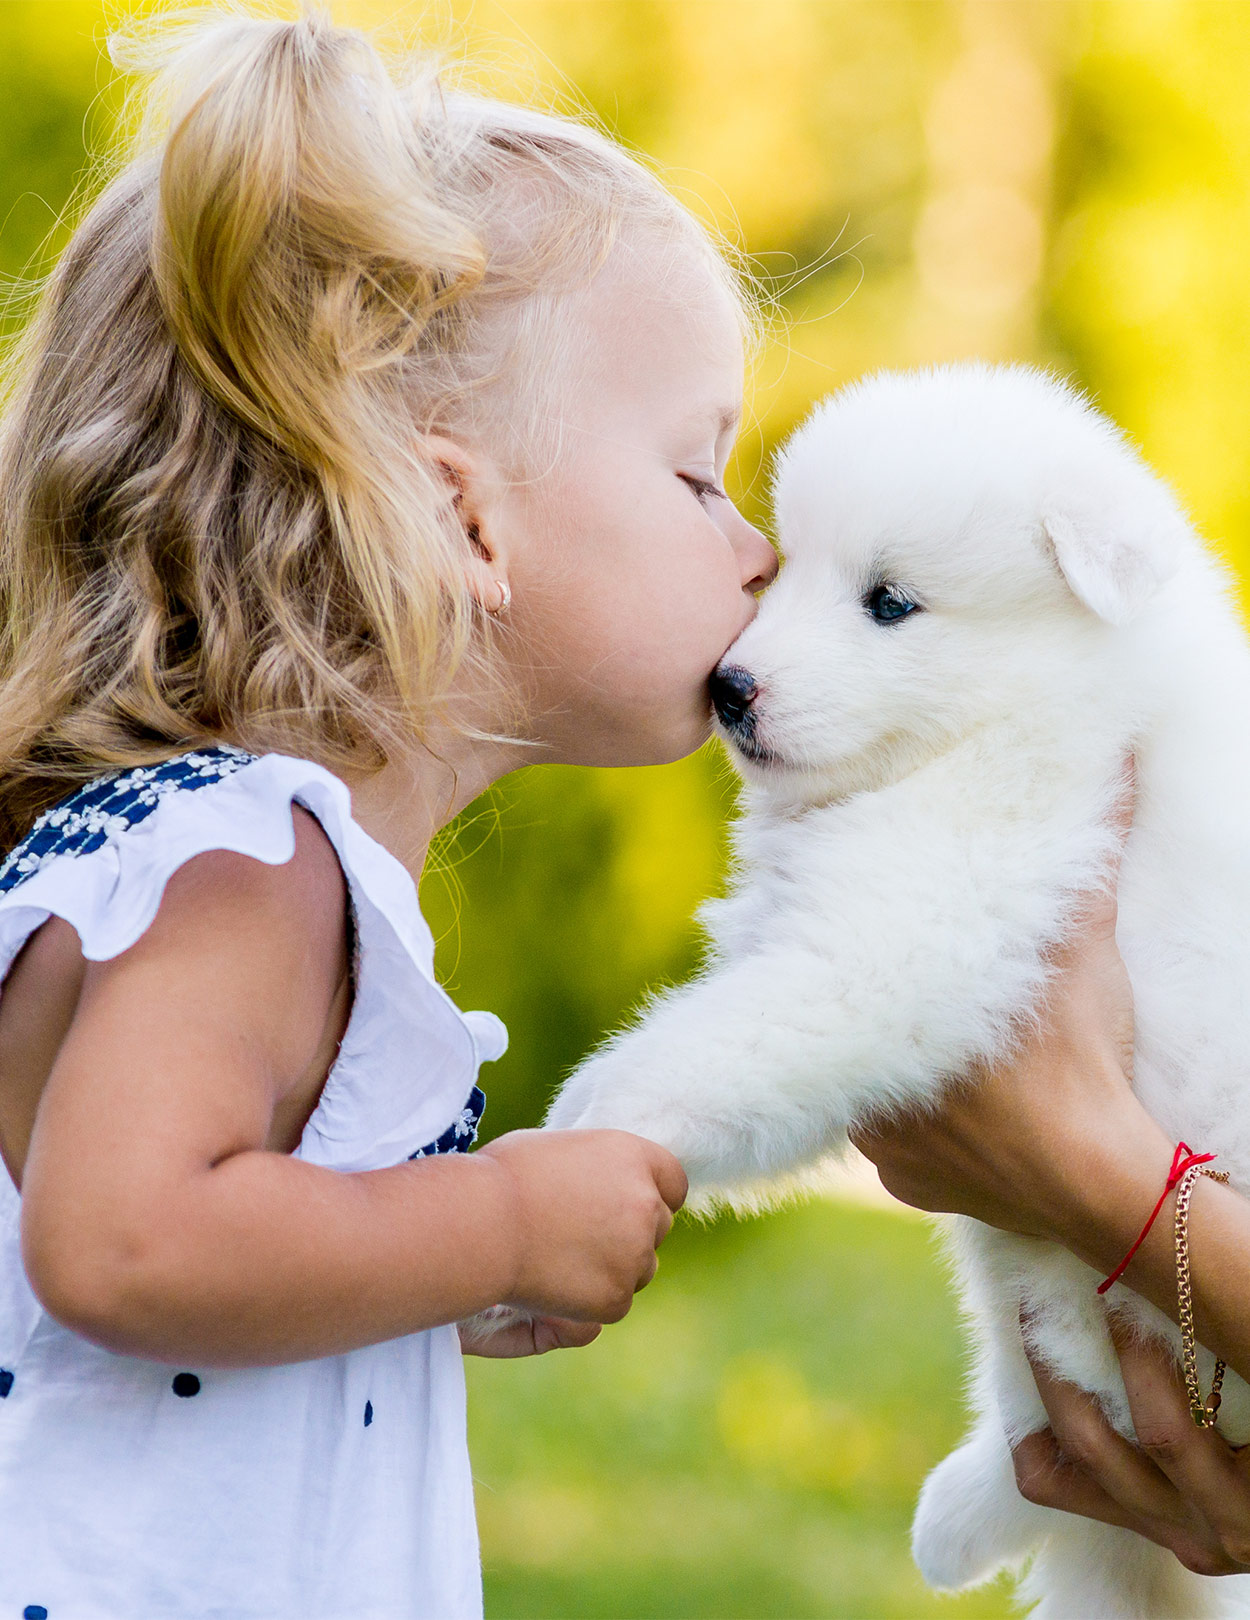 Do dogs like kisses from humans?